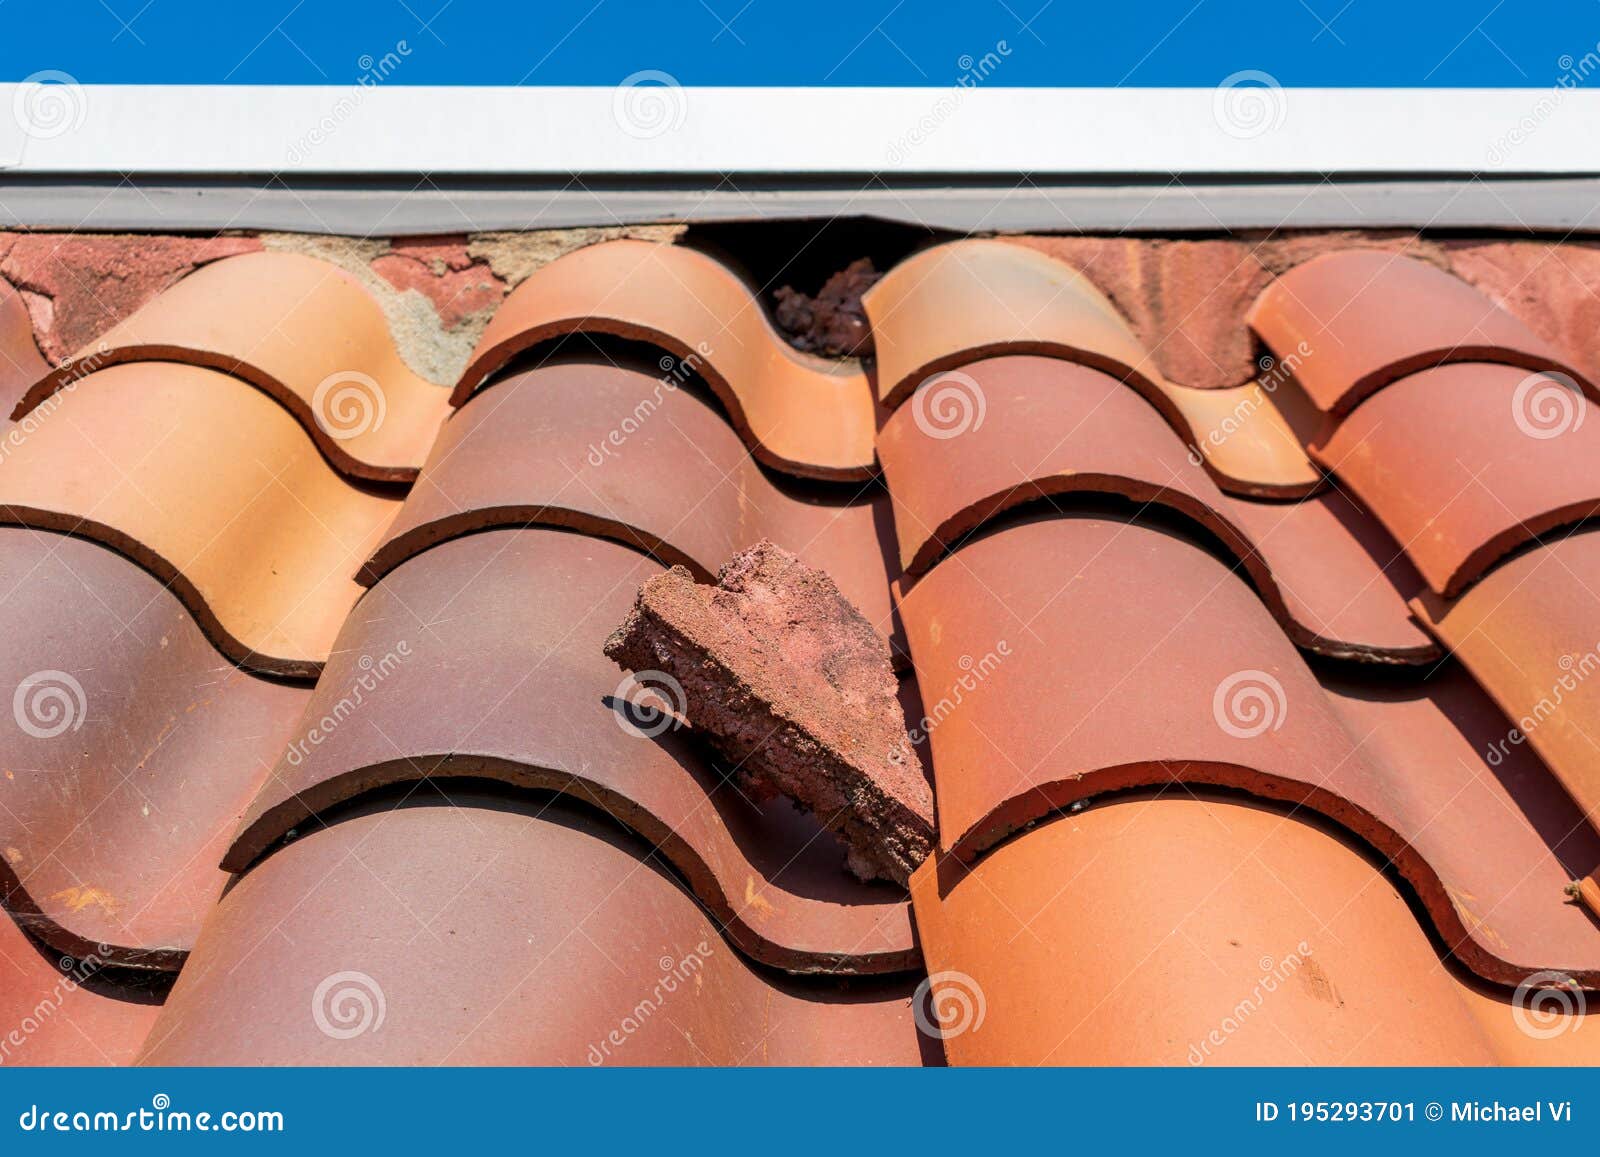 damaged bird stopper on the clay tile roof creates openings to birds and wildlife